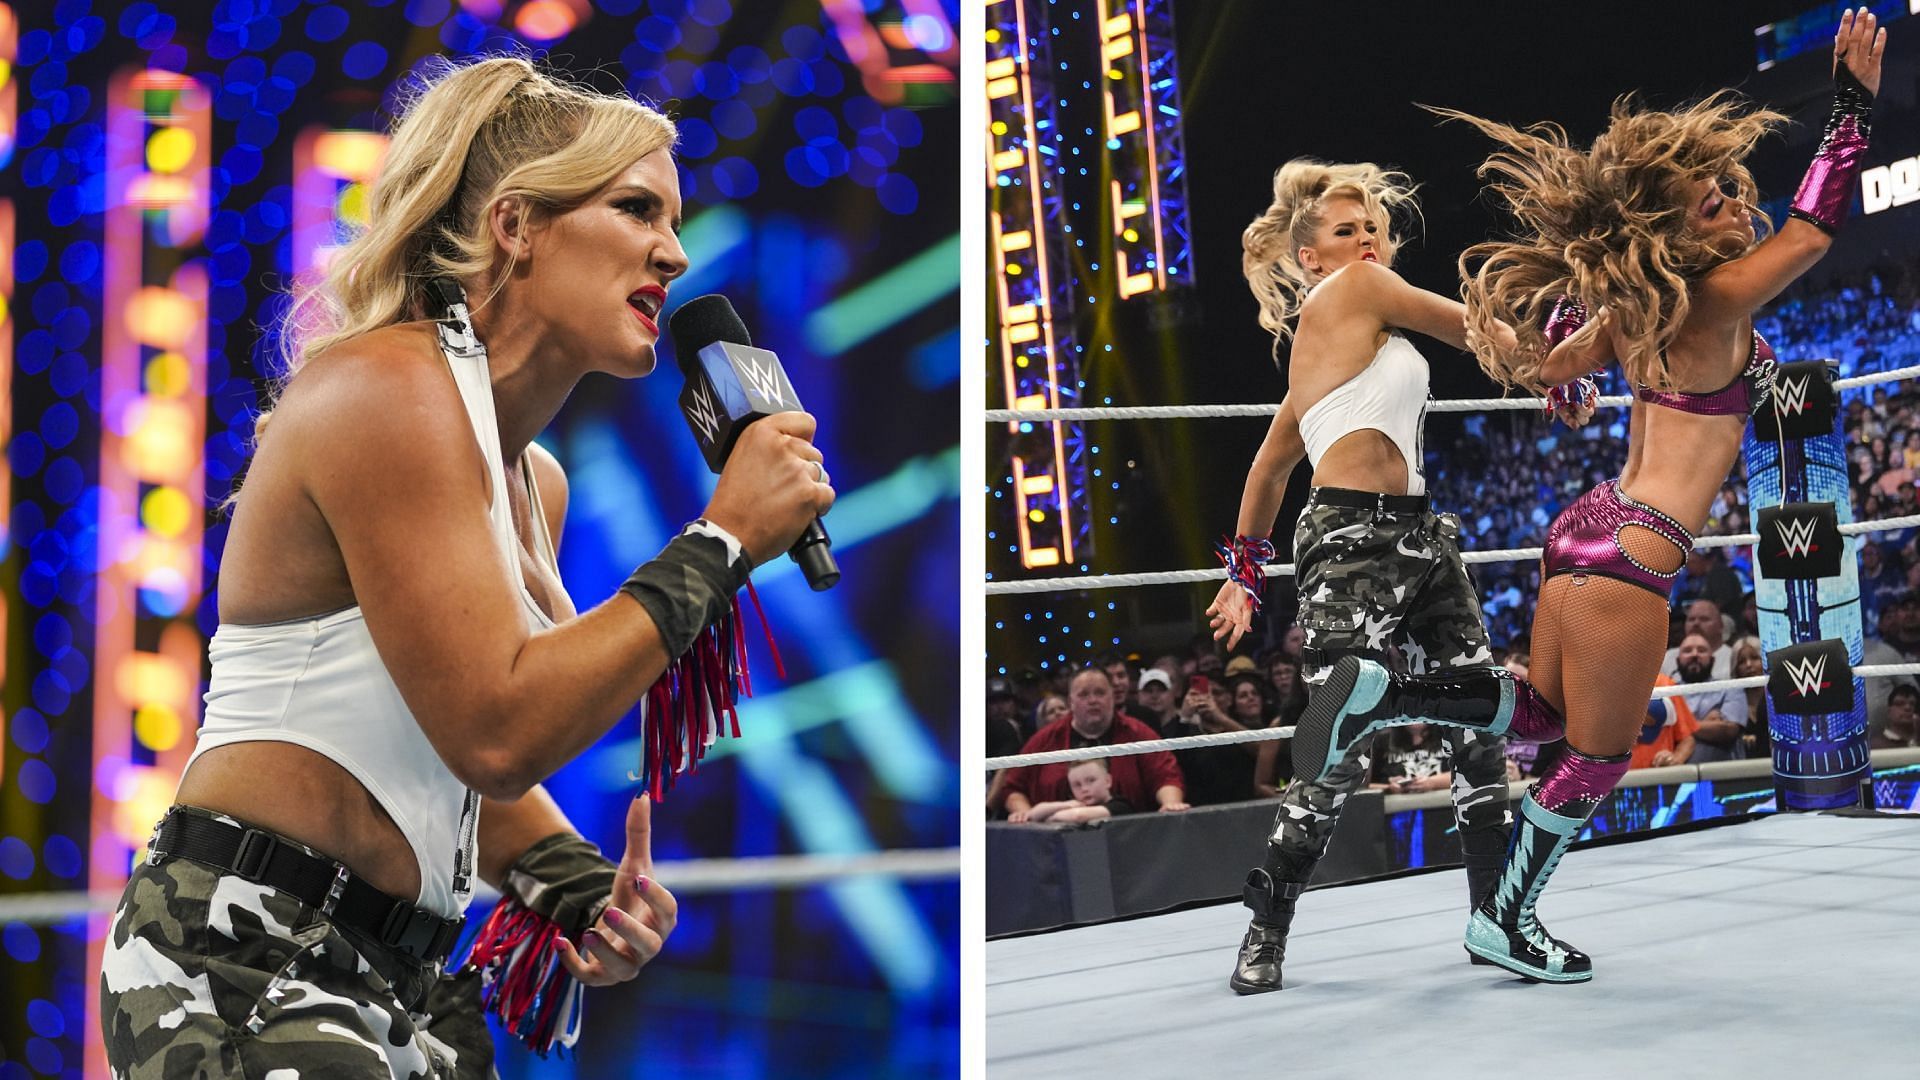 Lacey Evans turned heel on the latest WWE SmackDown